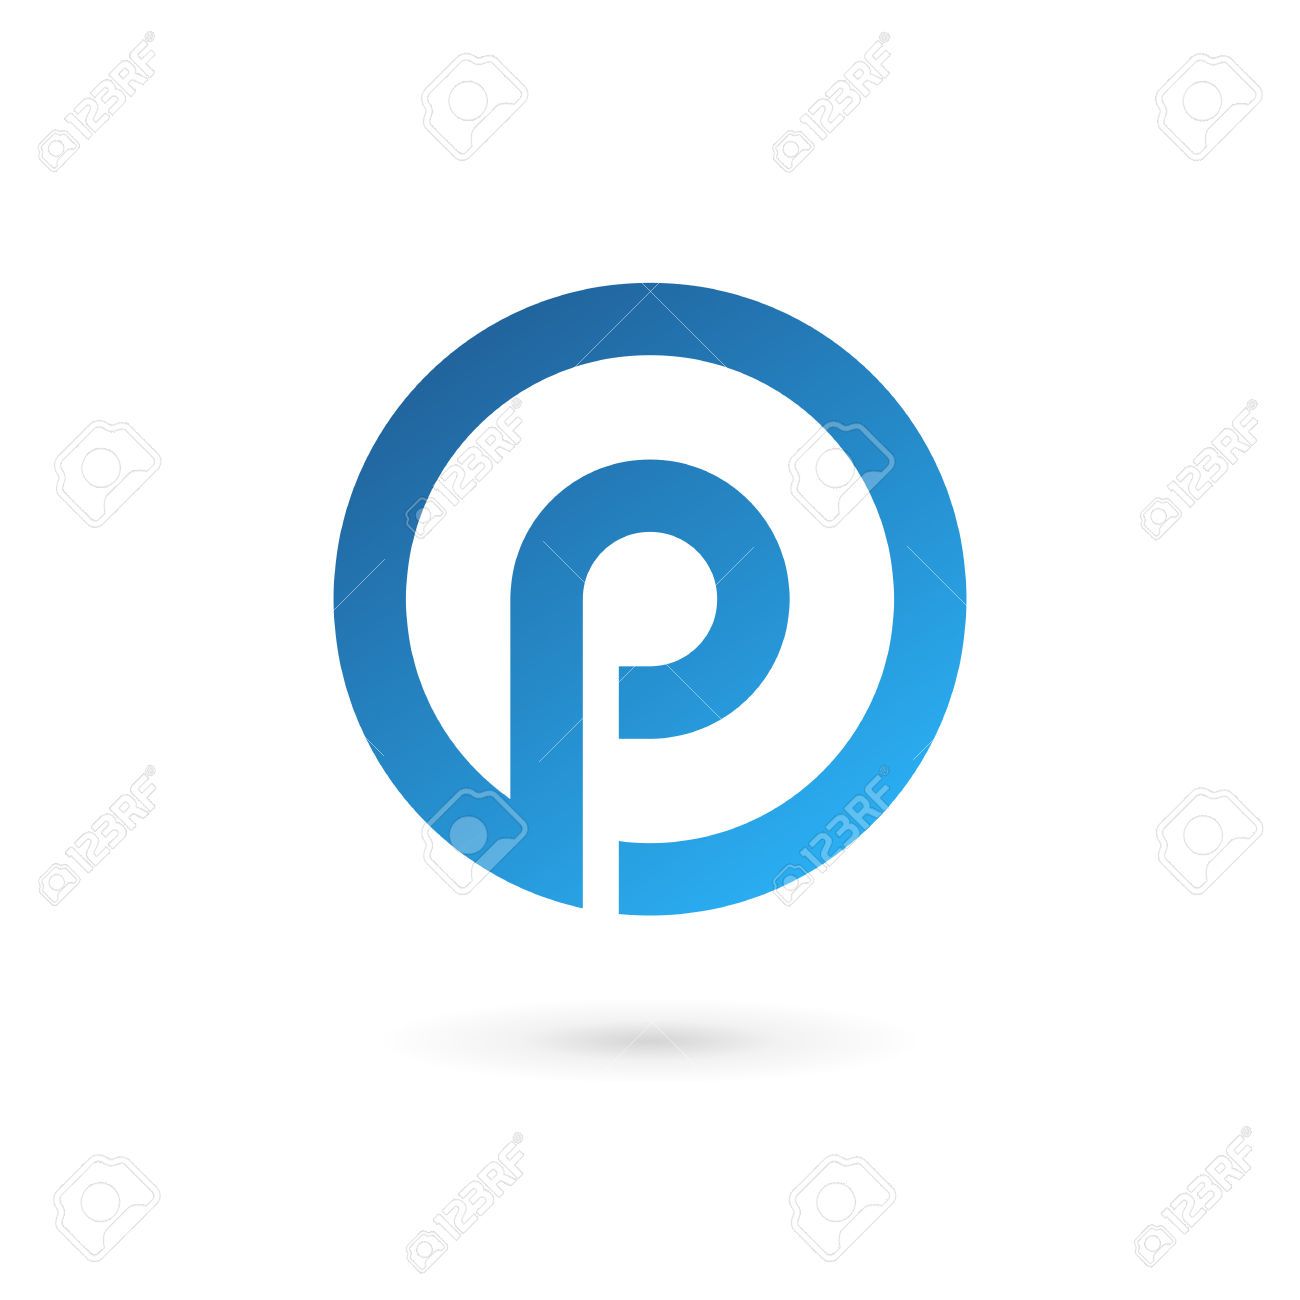 Letter P Logo Cliparts, Stock Vector And Royalty Free Letter.